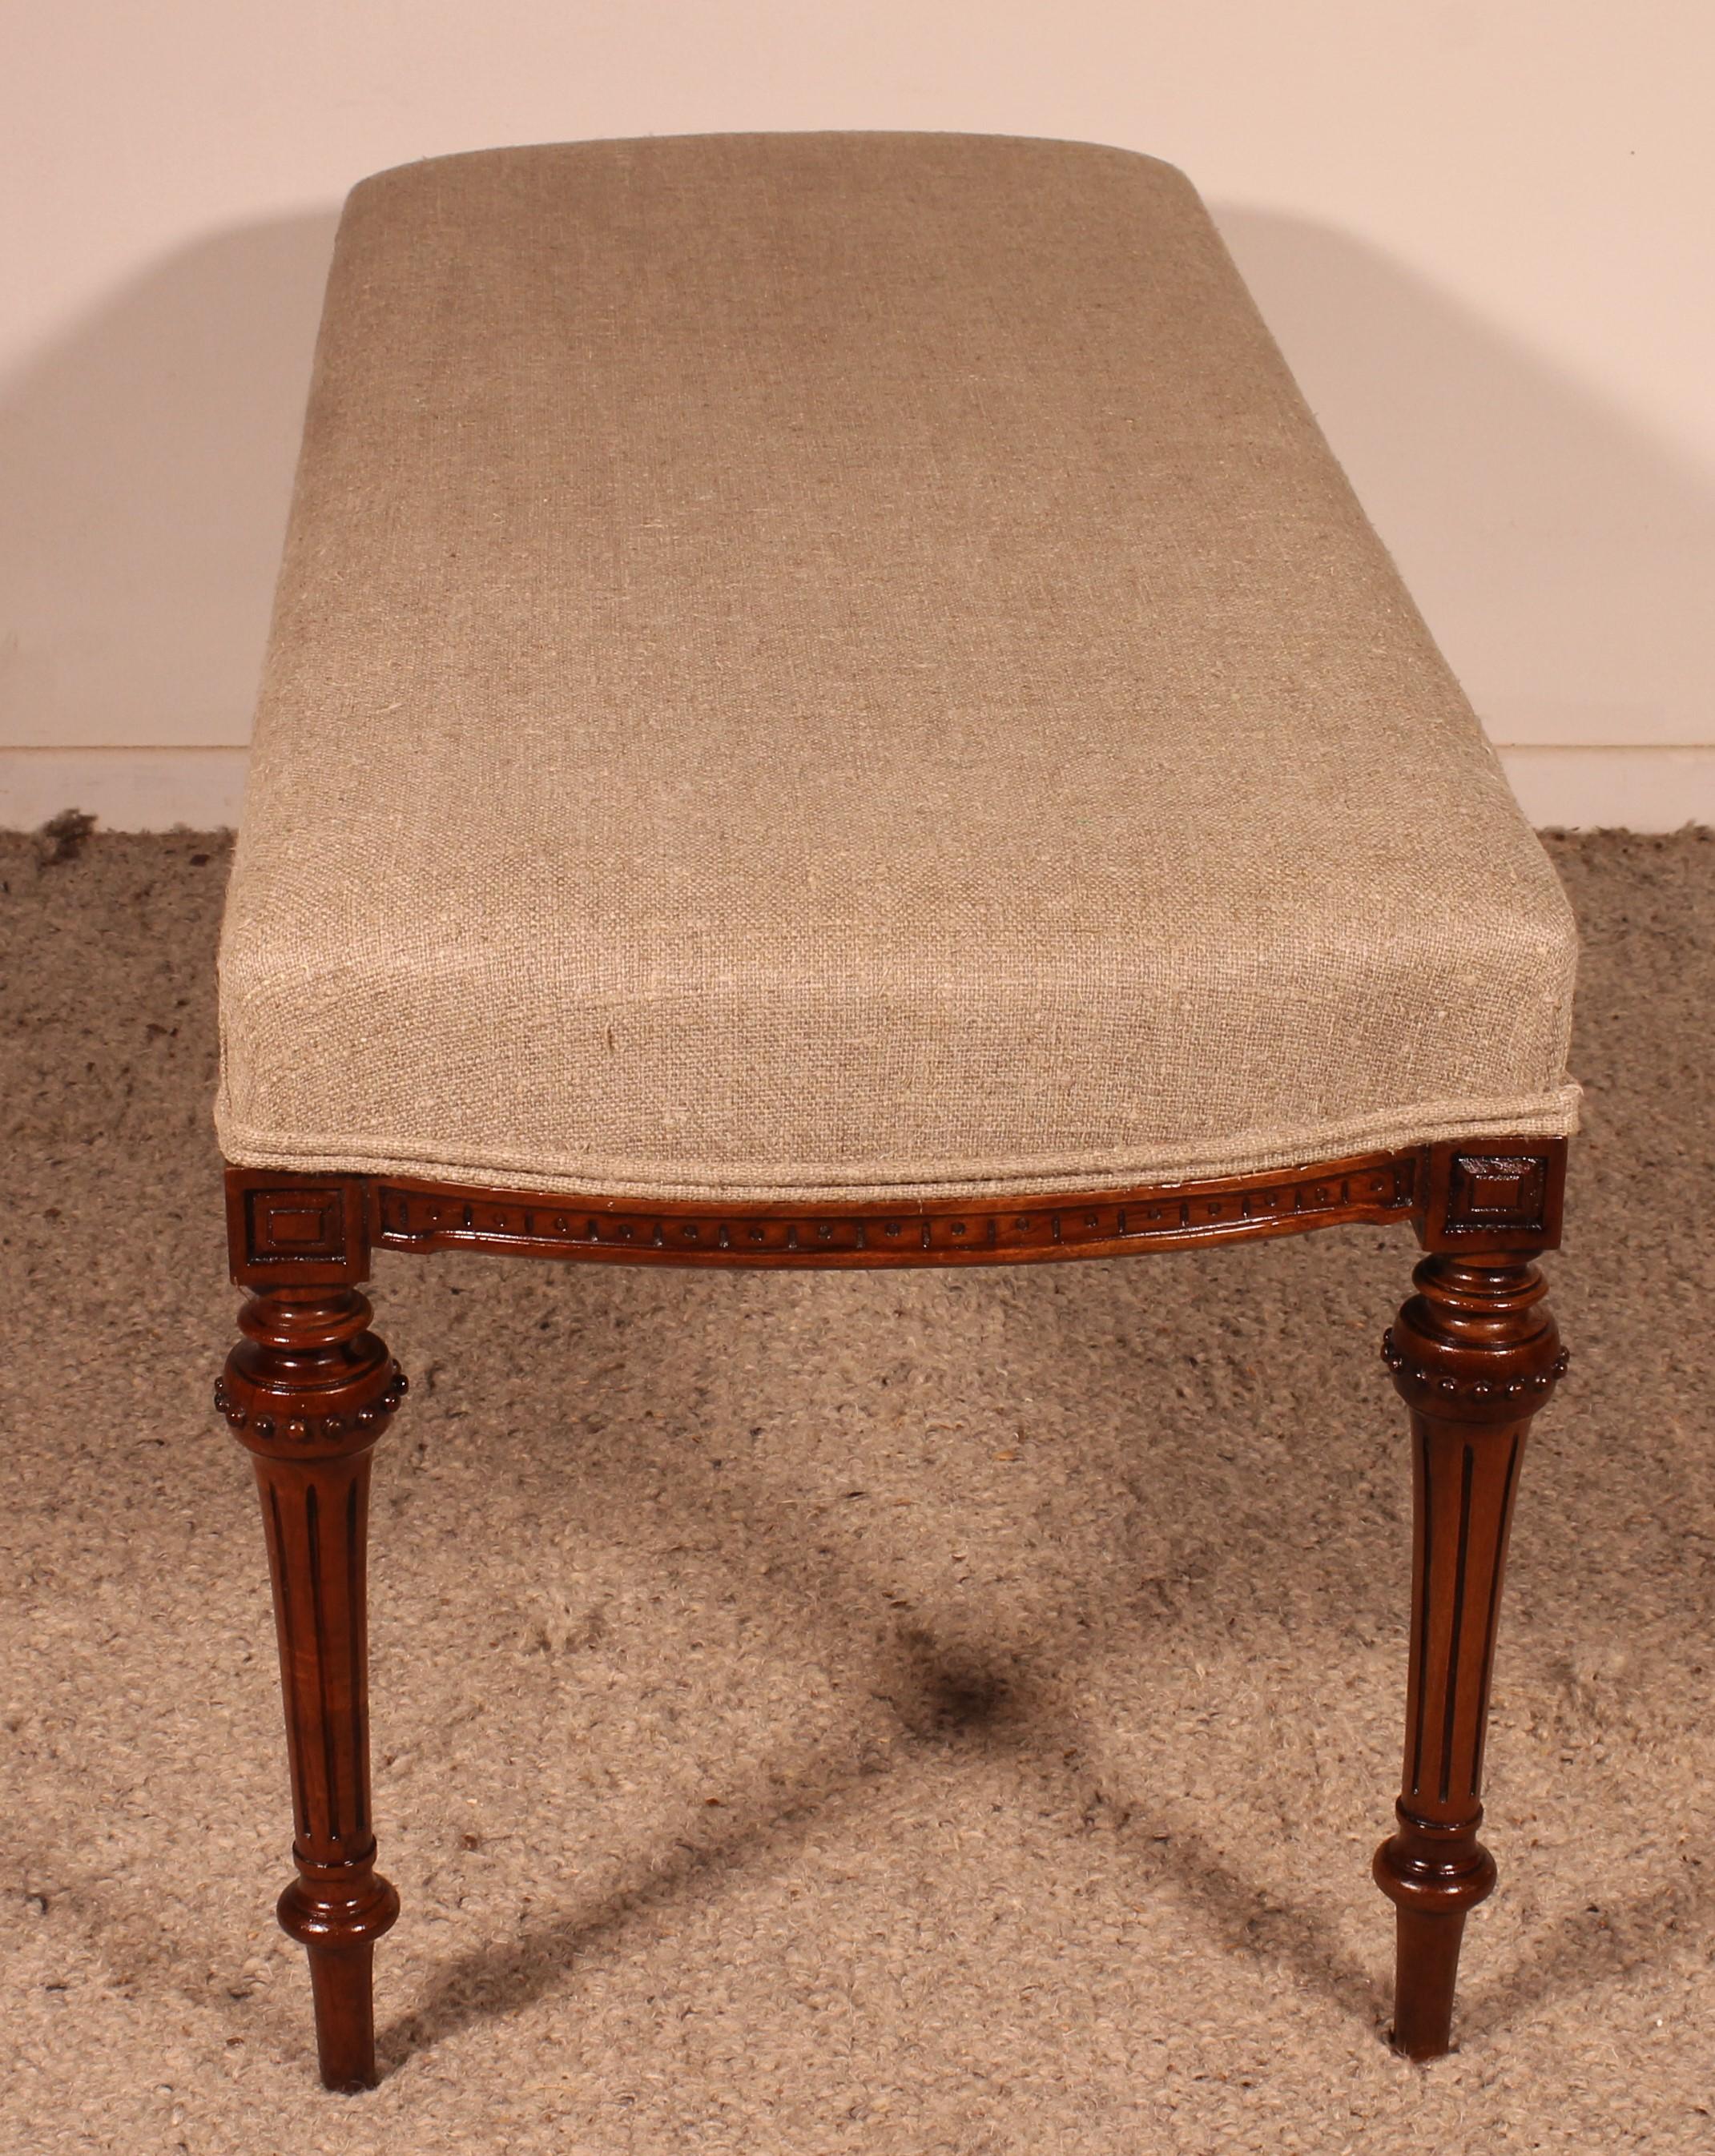 Mahogany Bench From The 19th Century Covered With A Linen Fabric 2